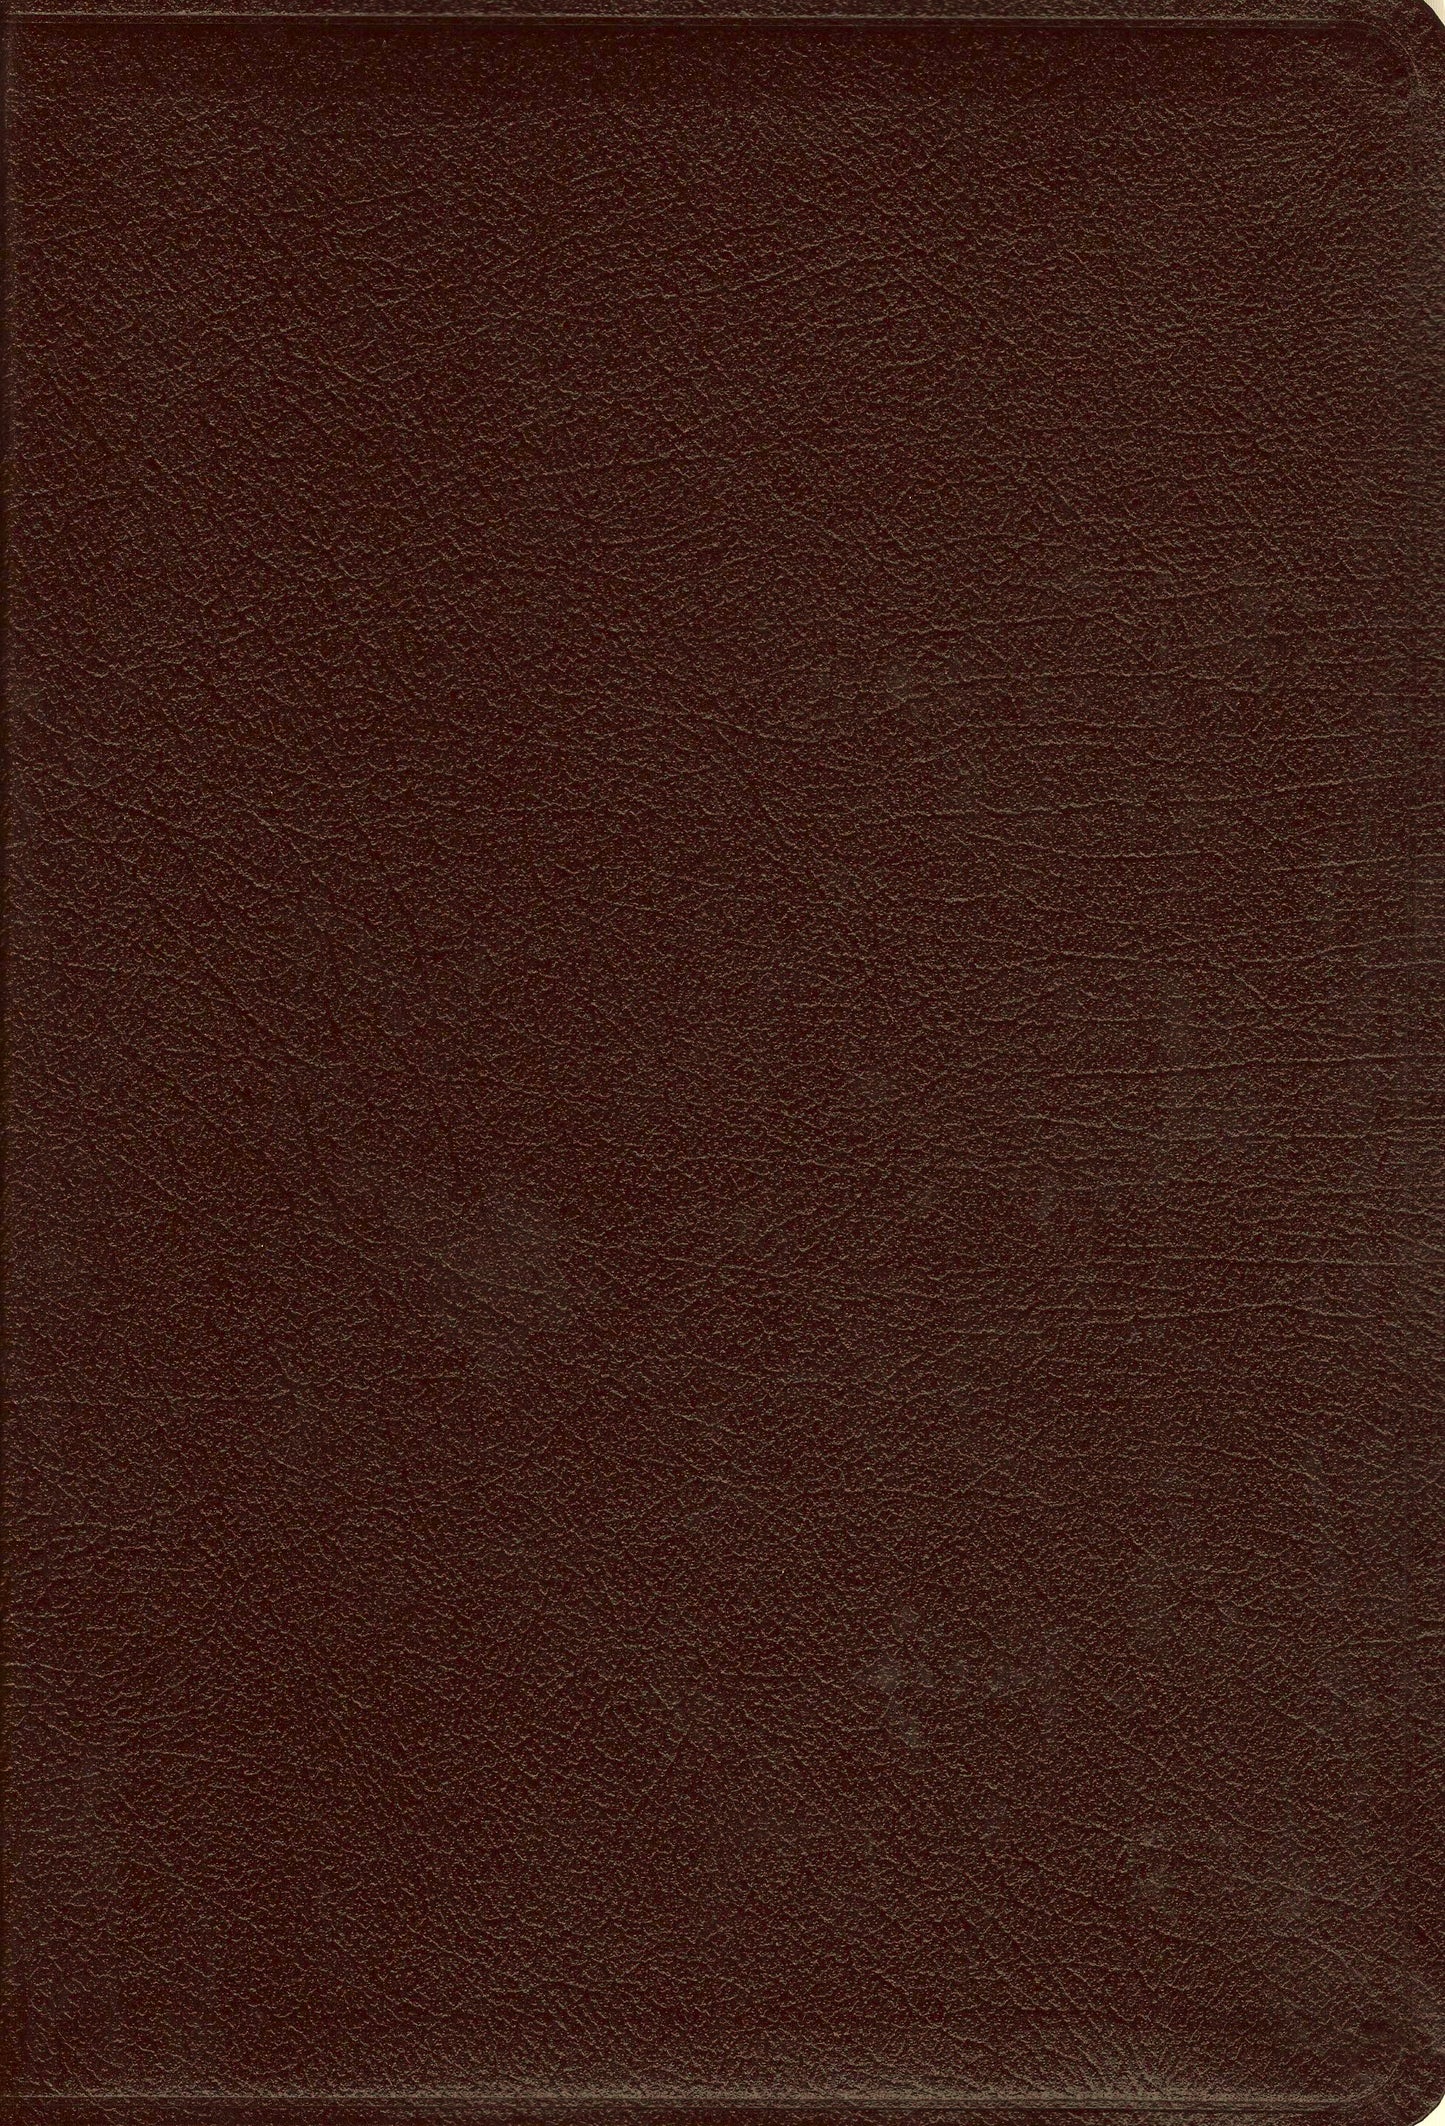 Zondervan Amplified Holy Bible, Large Print - Bonded Leather (Burgundy)